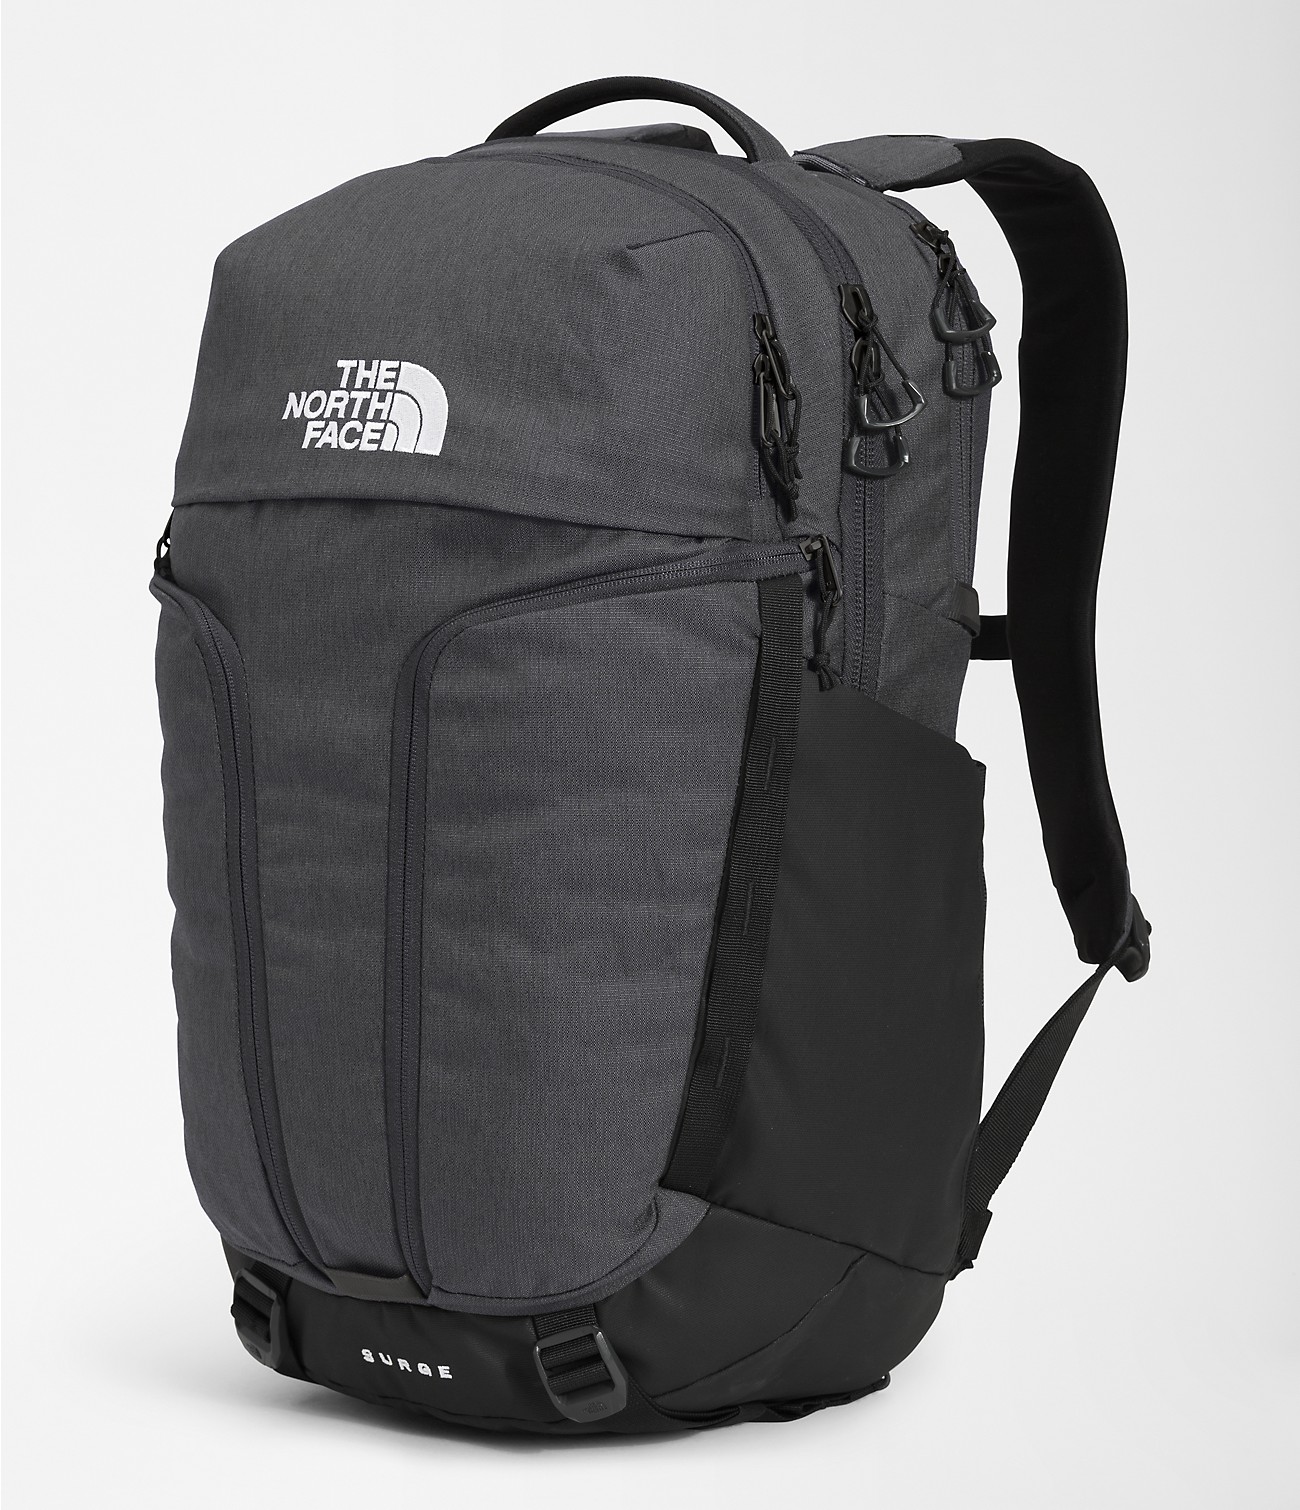 Unlock Wilderness' choice in the Osprey Vs North Face comparison, the Surge Backpack by The North Face